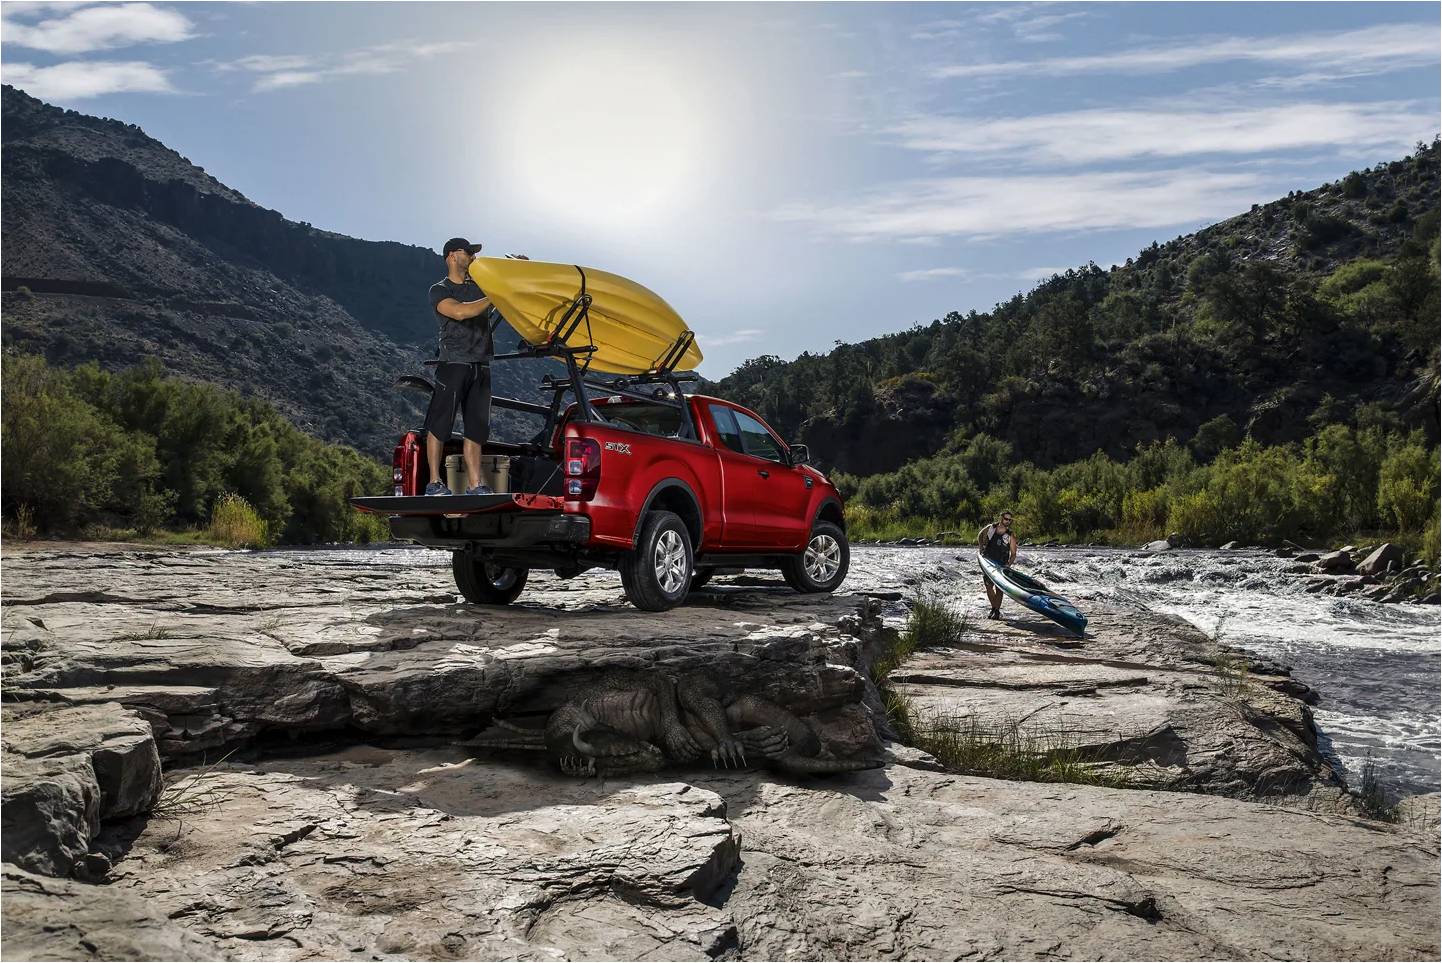 A Ford Ranger along a river with a man unloading a kayak from the back.